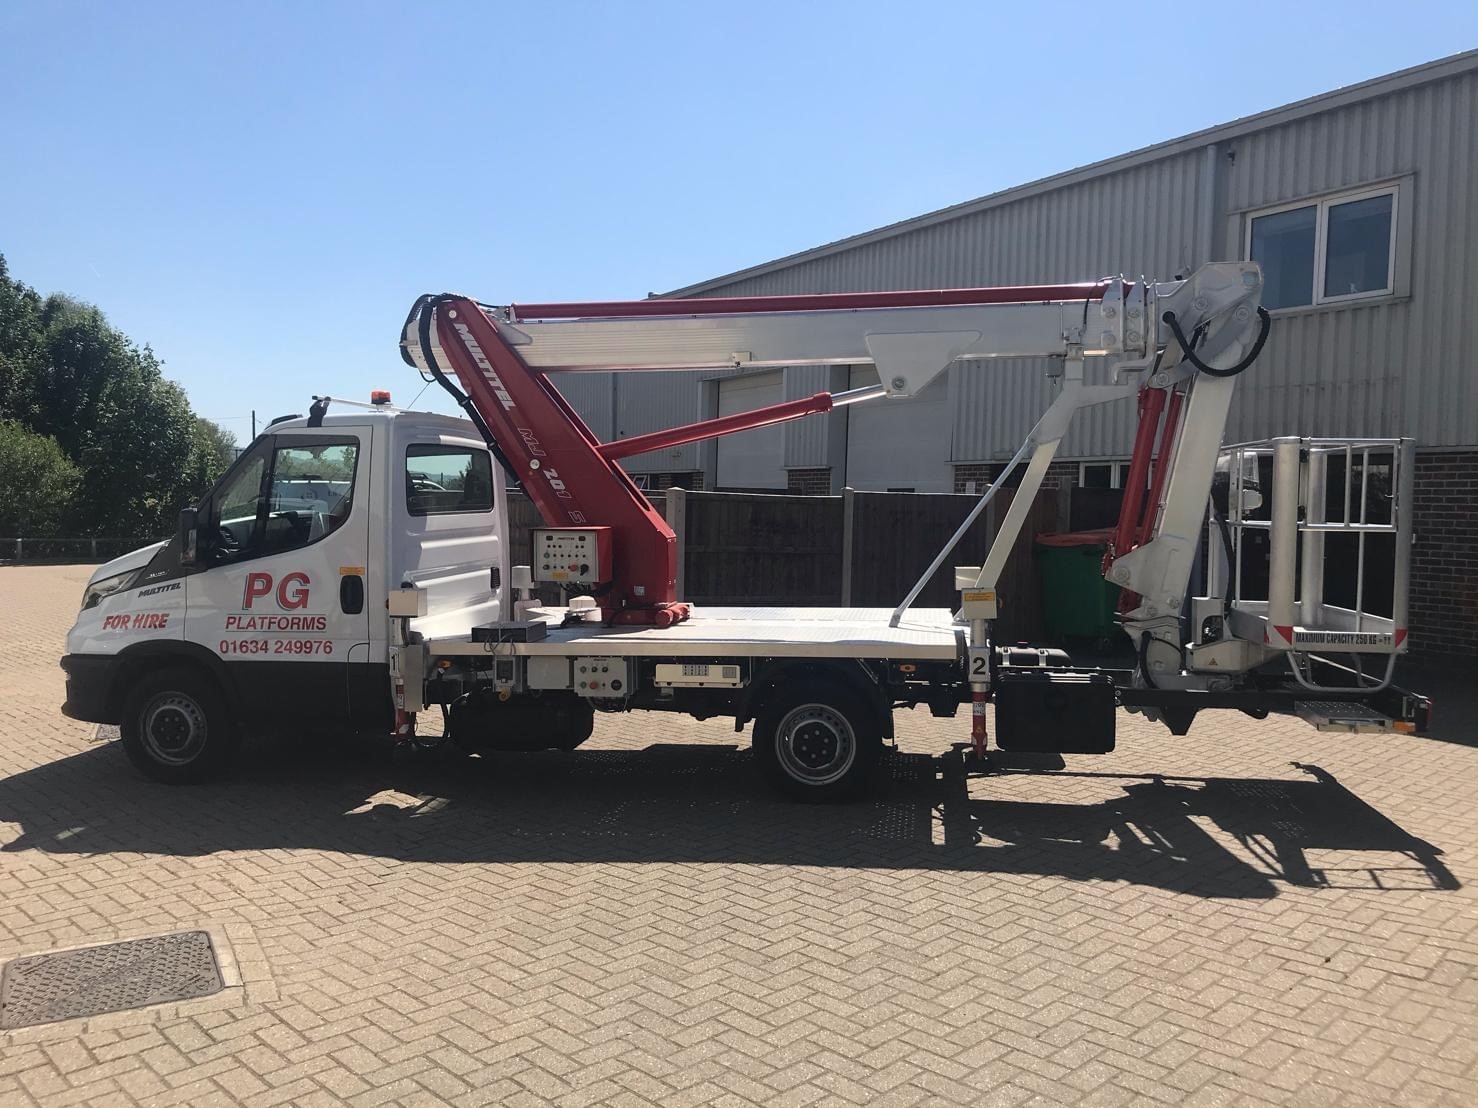 Multitel MJ201 vehicle mounted lift hire from PG Platforms